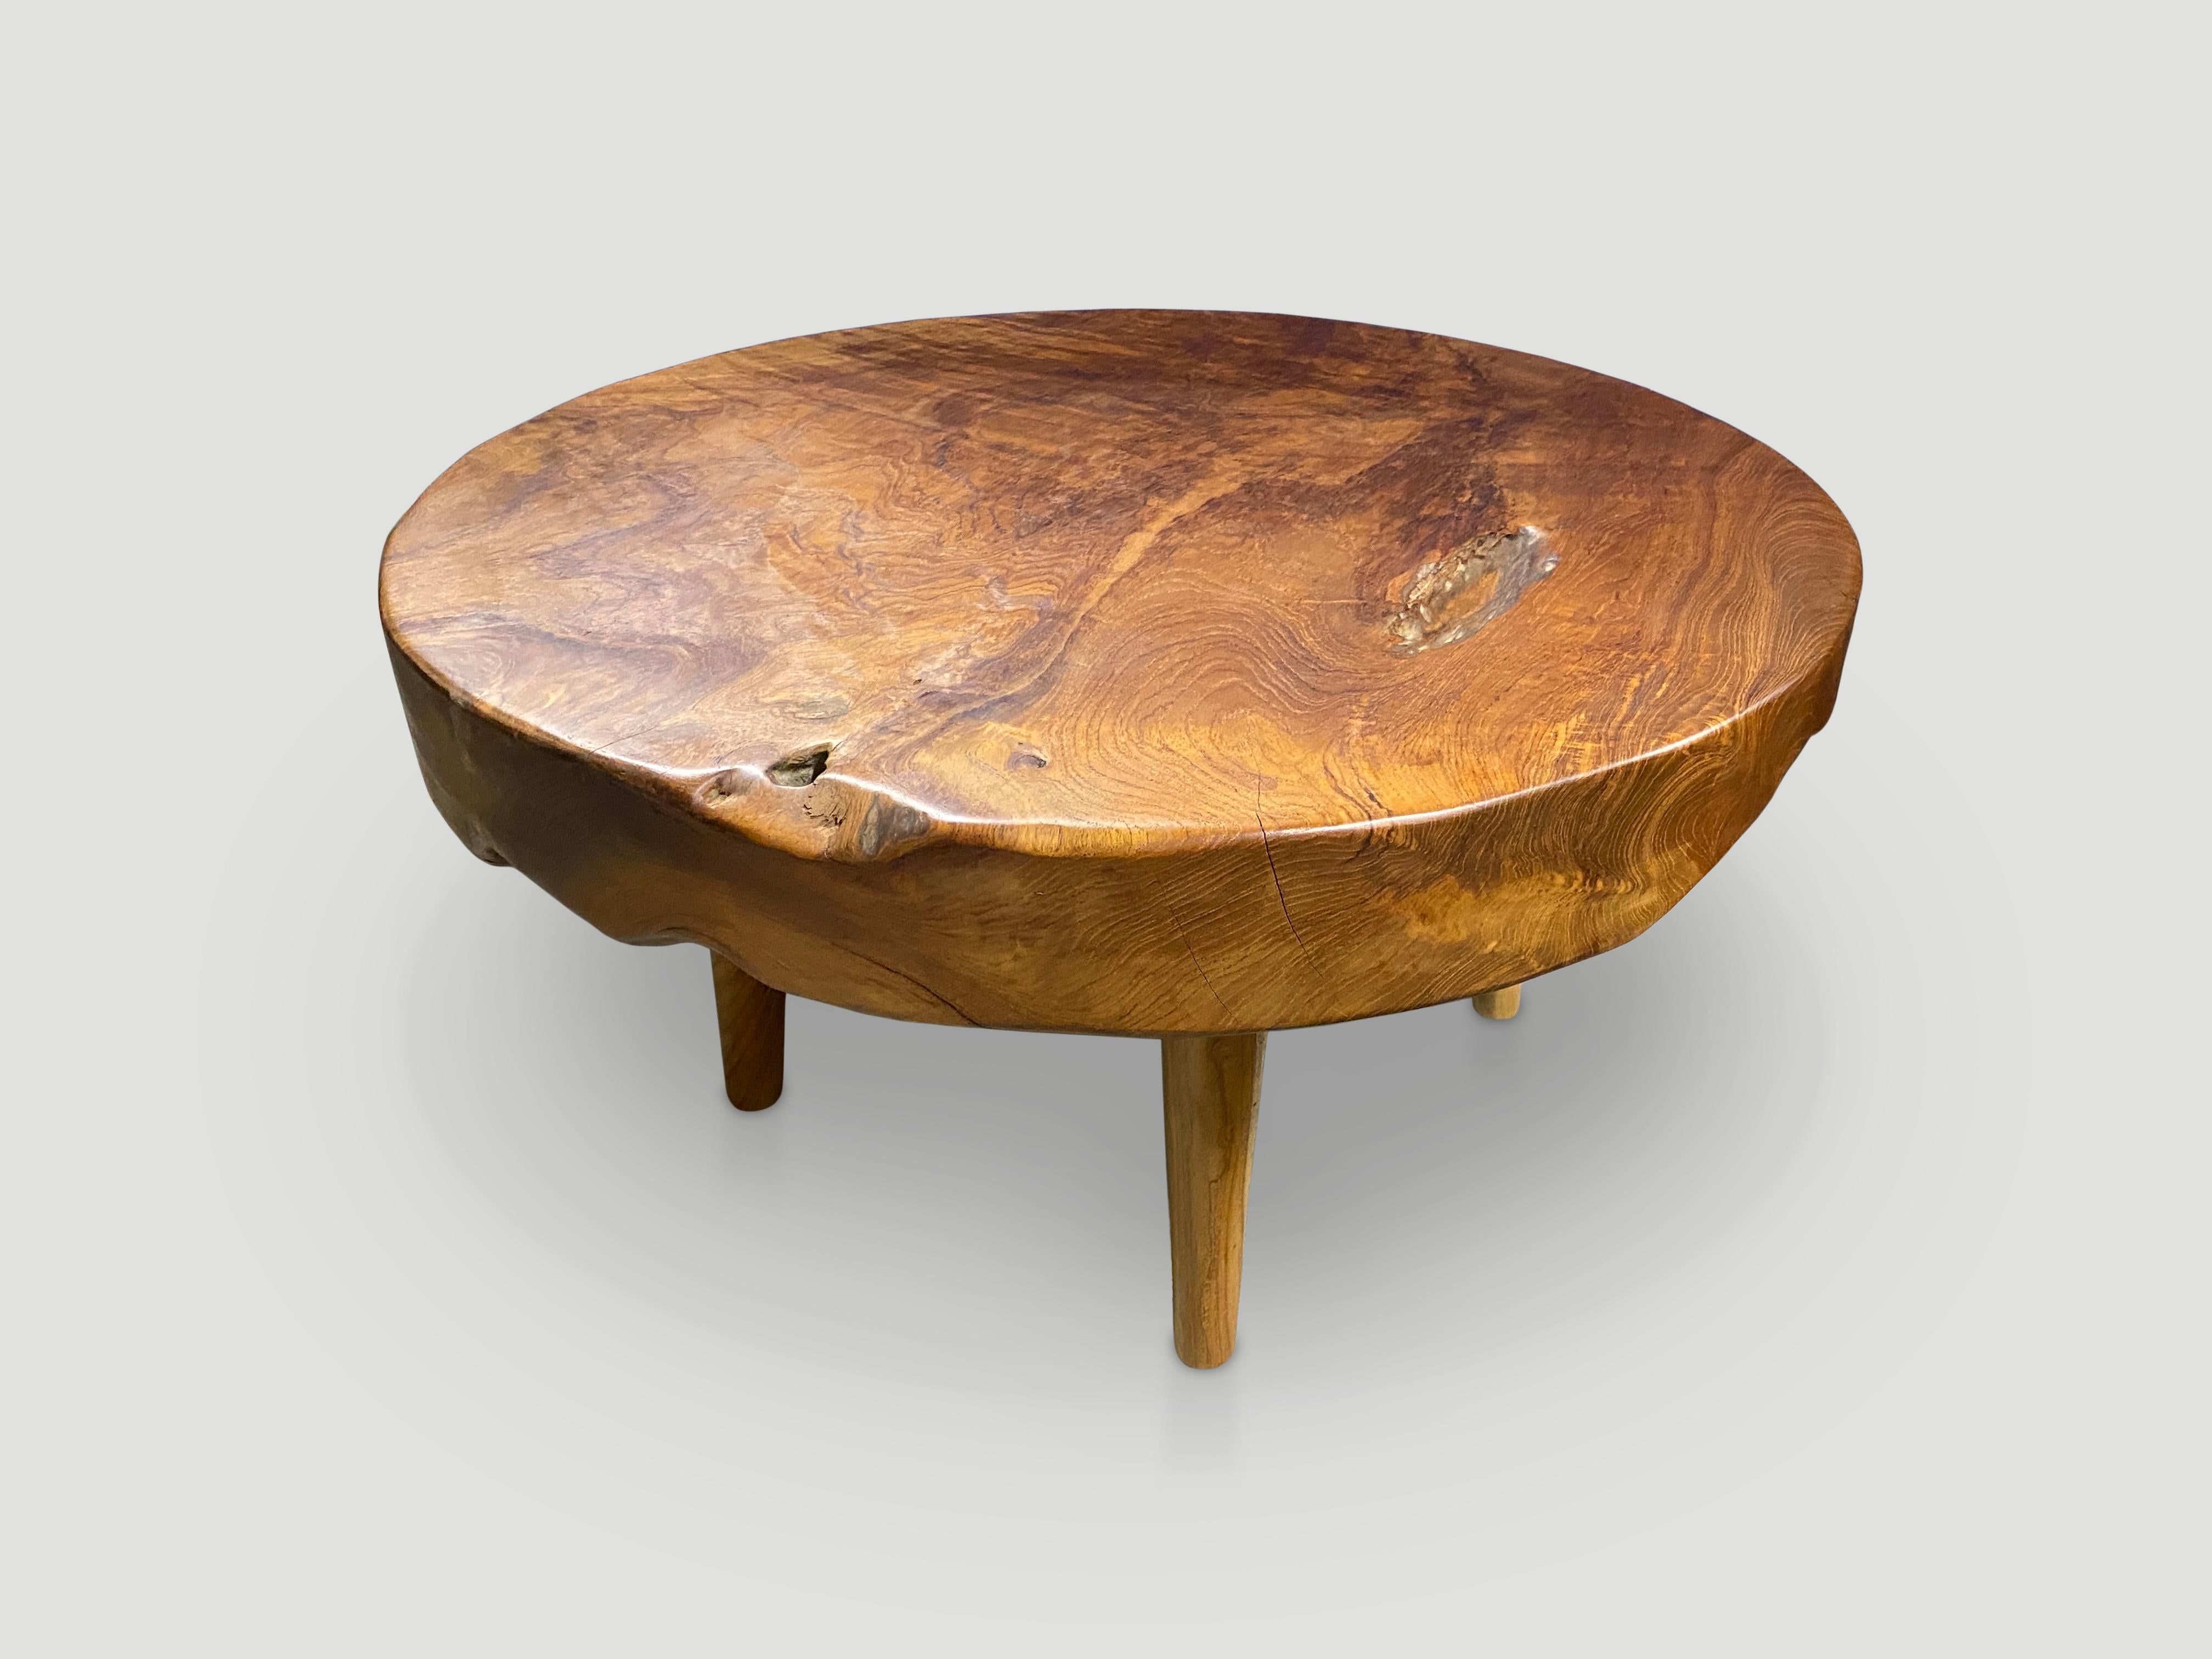 Impressive three and a half inch reclaimed teak wood single slab coffee table. Floating on mid century style cone legs and finished with a natural oil revealing the beautiful wood grain. Organic with a twist. Also available bleached and